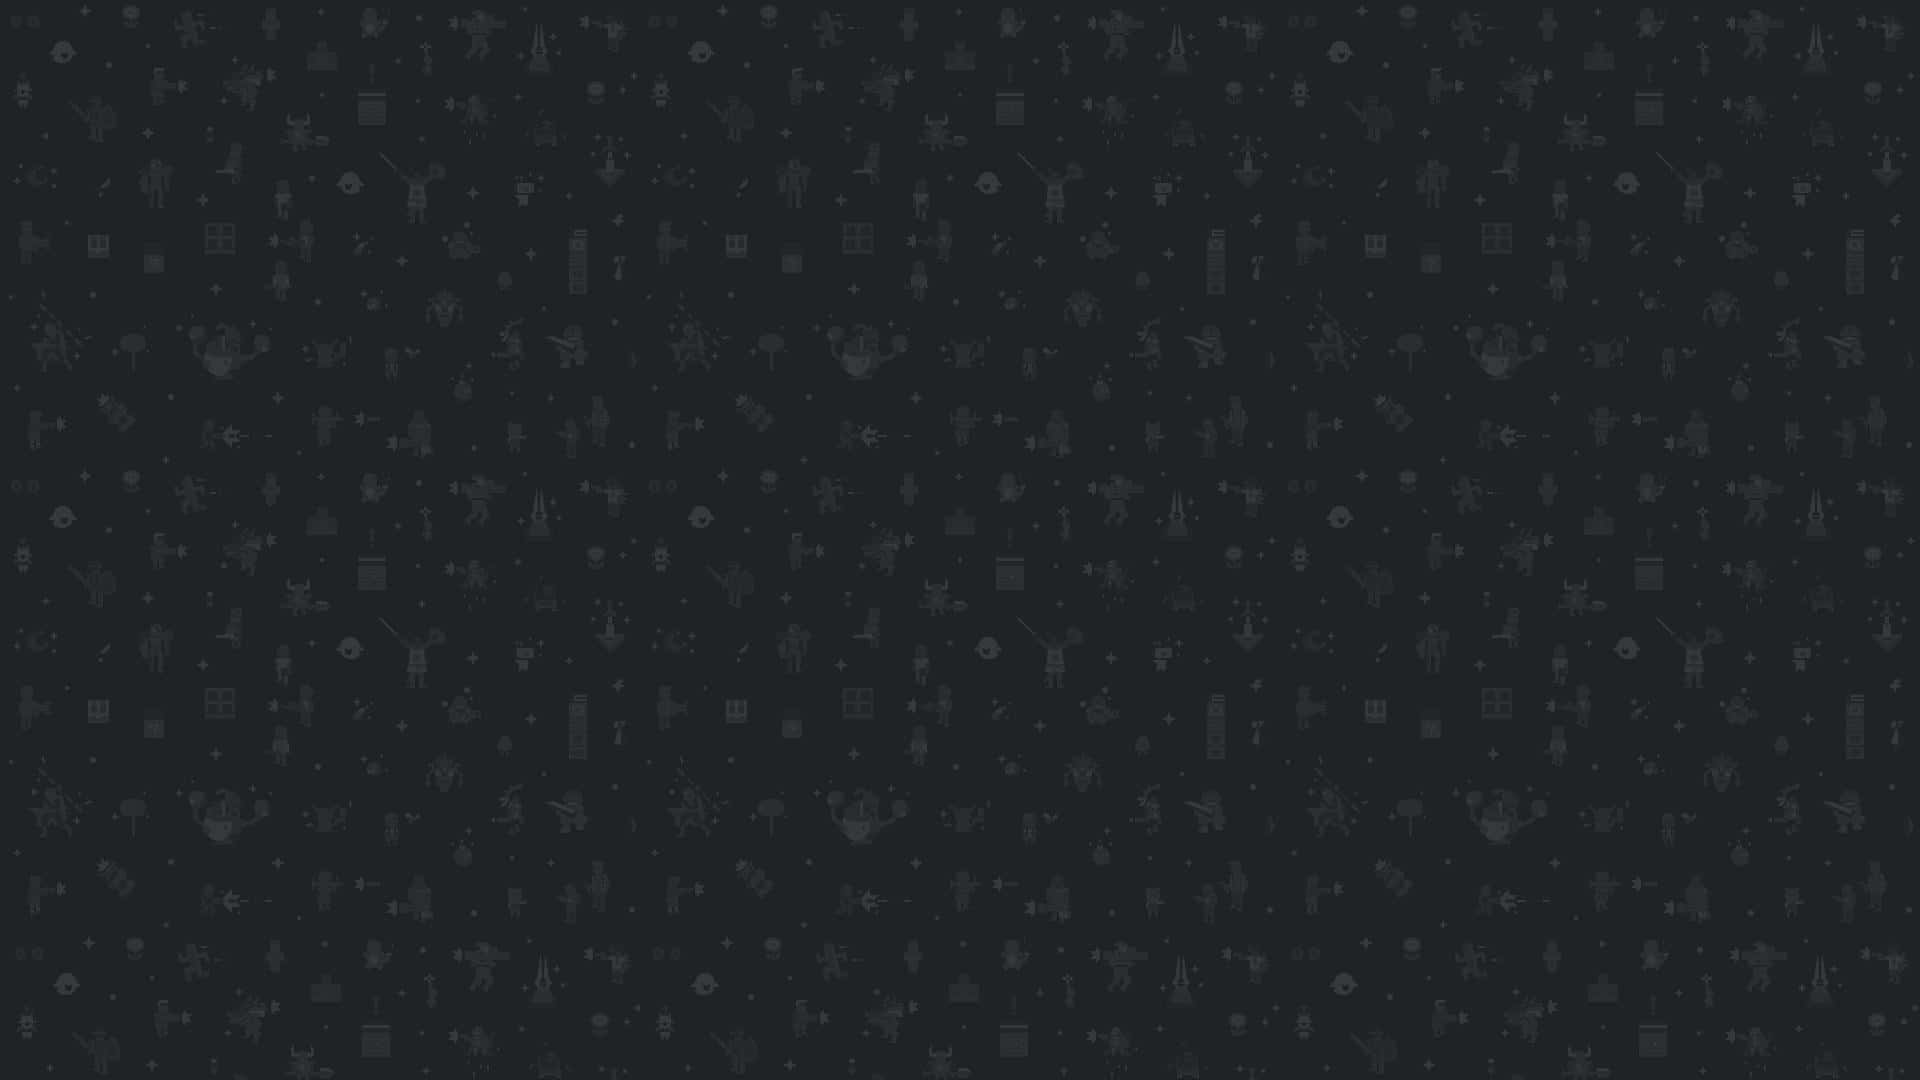 A Black Background With Small Dots On It Wallpaper